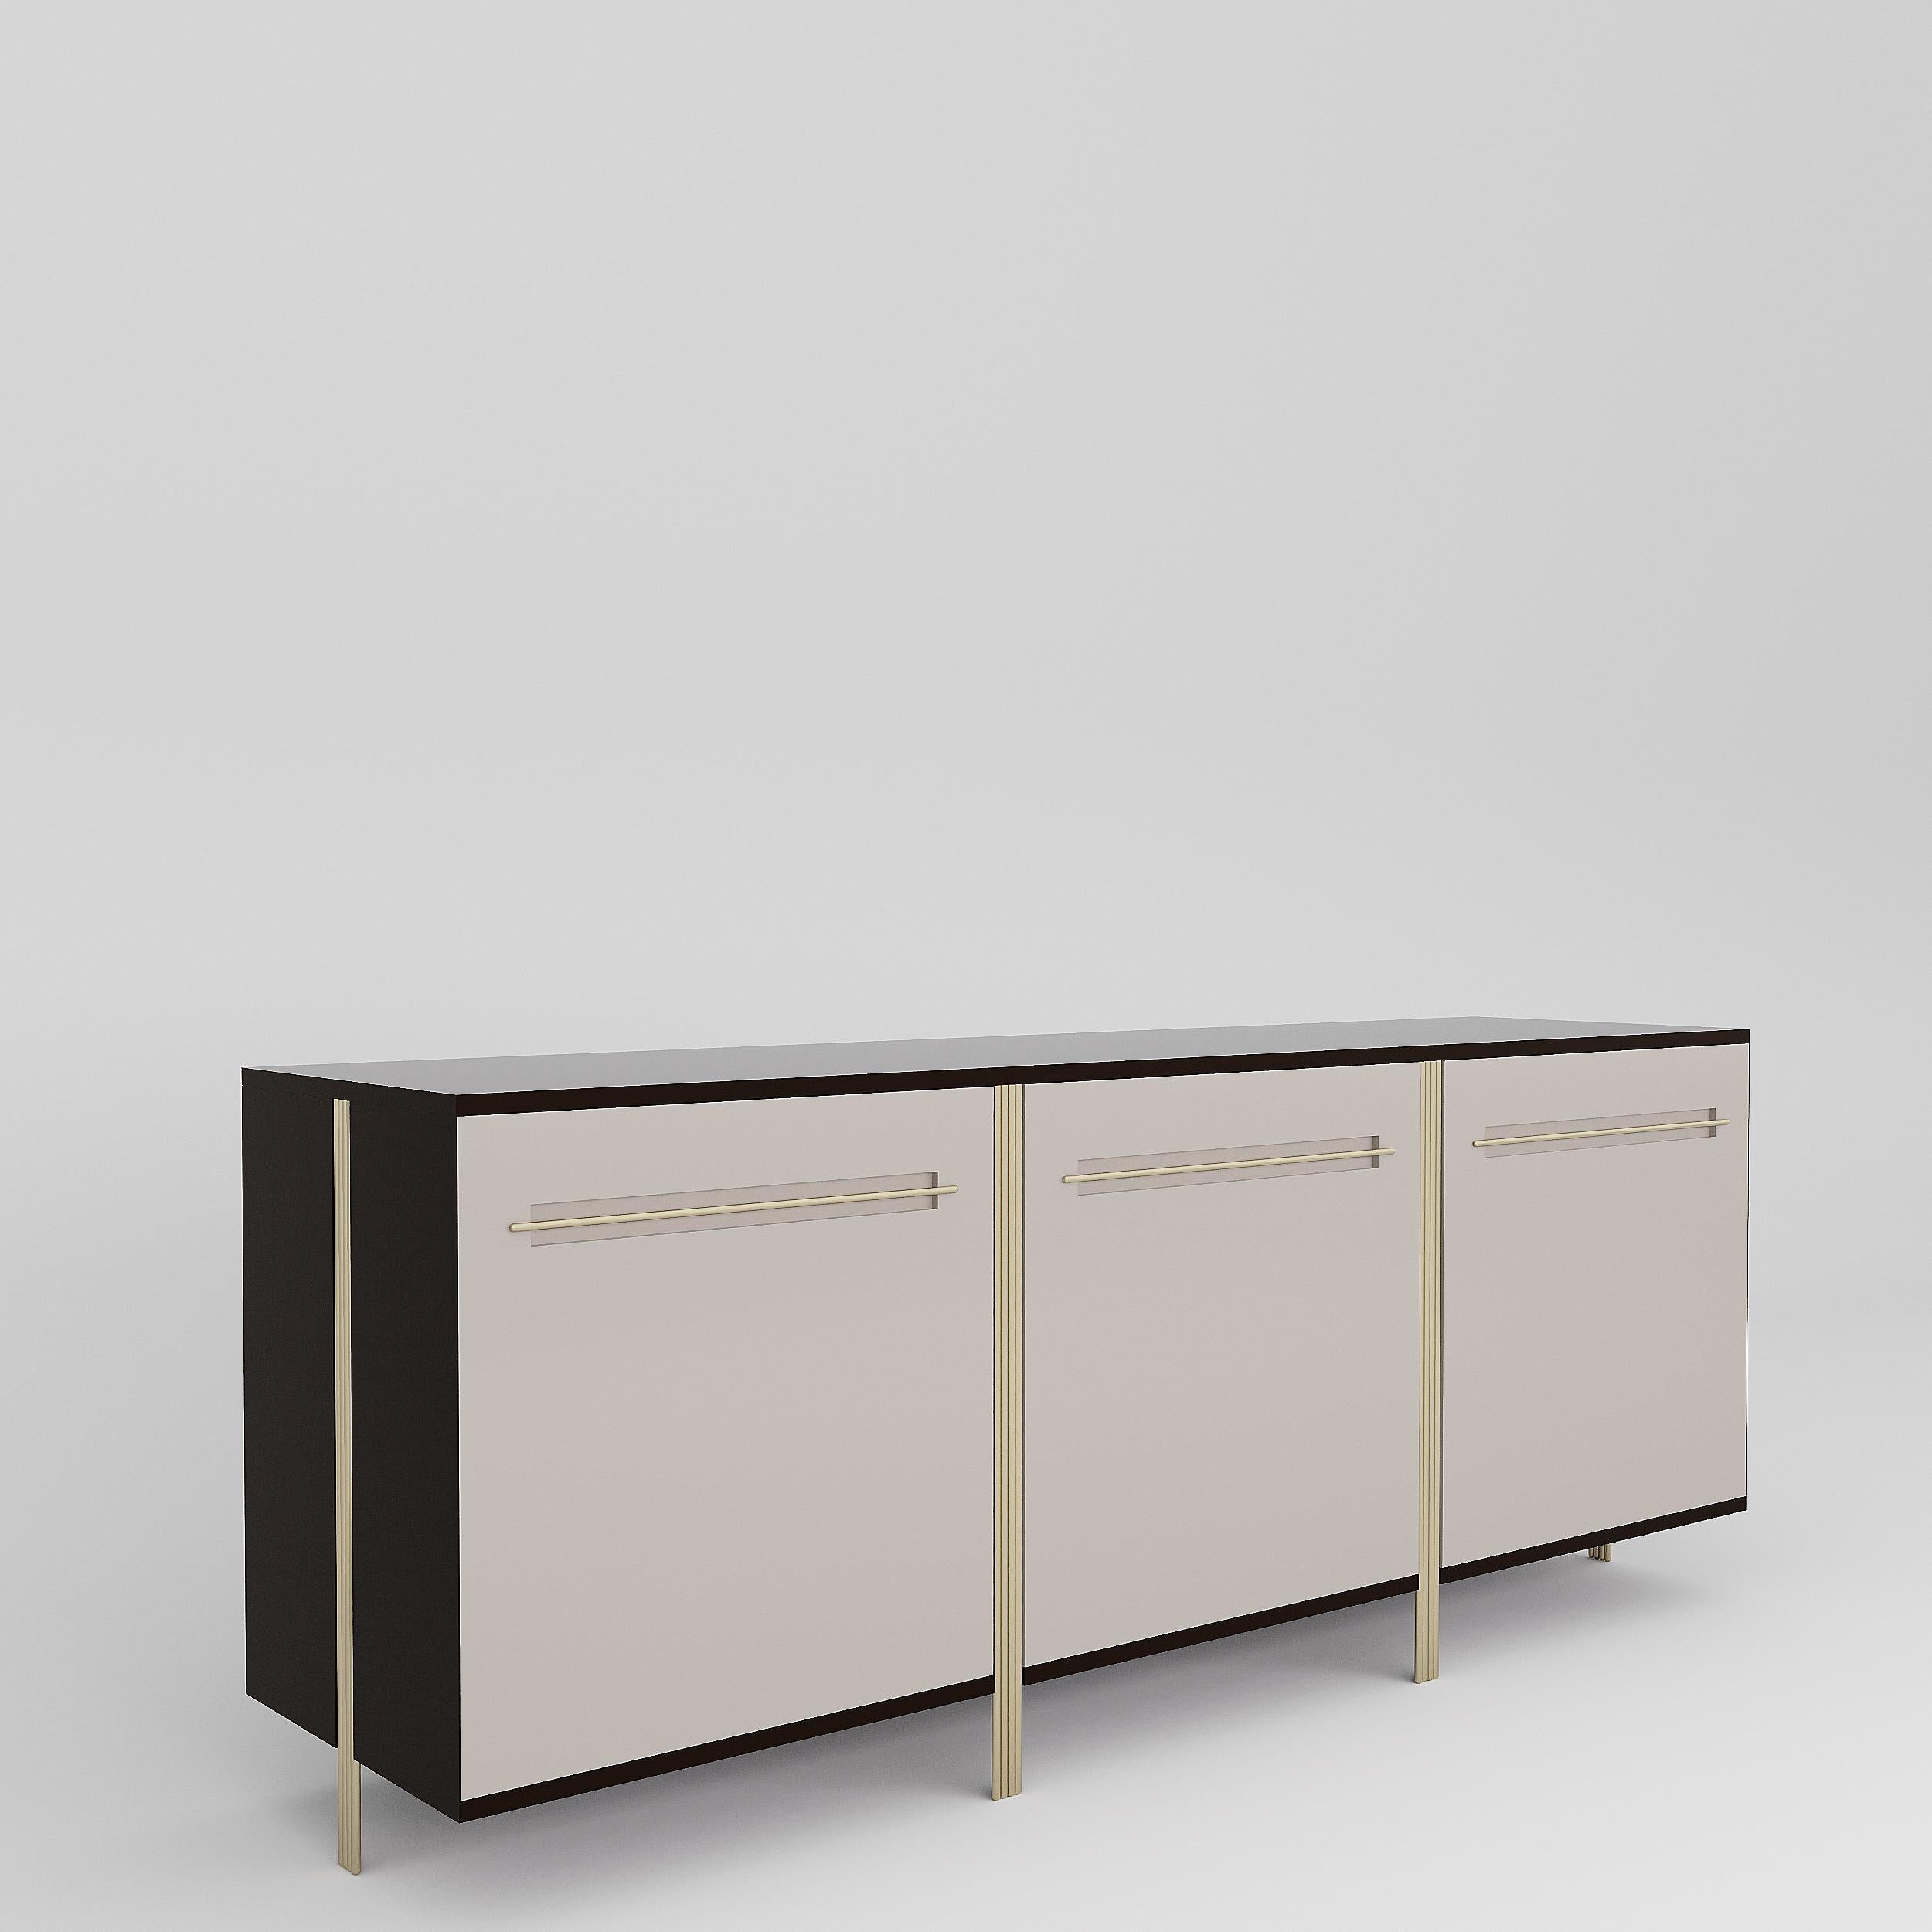 Portuguese VERSAGA sideboard in custom colors with Antique Brass handles and feet For Sale